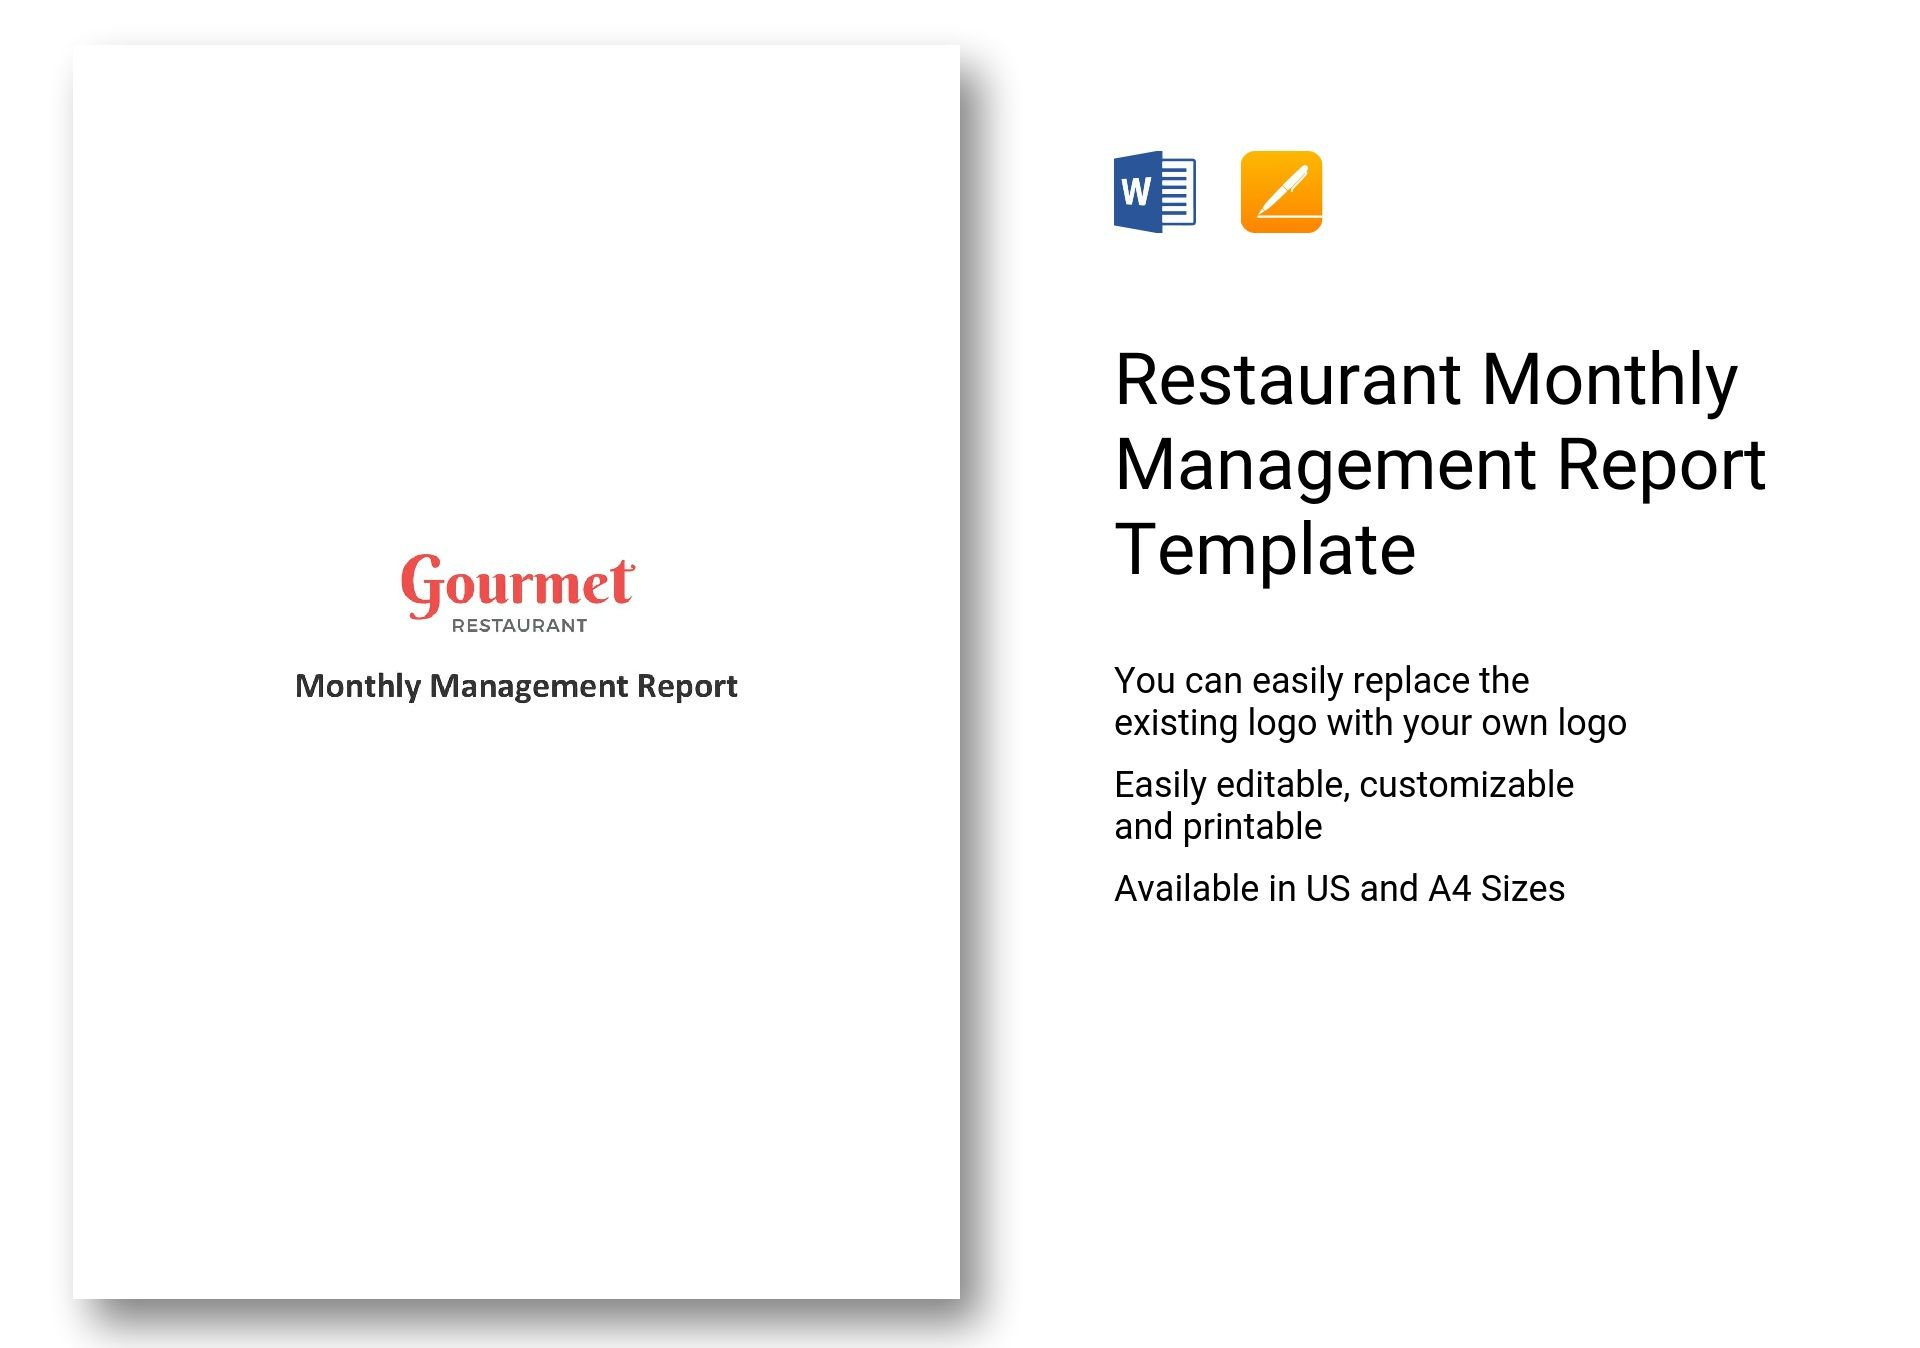 Restaurant Monthly Management Report Template In Word, Apple In It Management Report Template